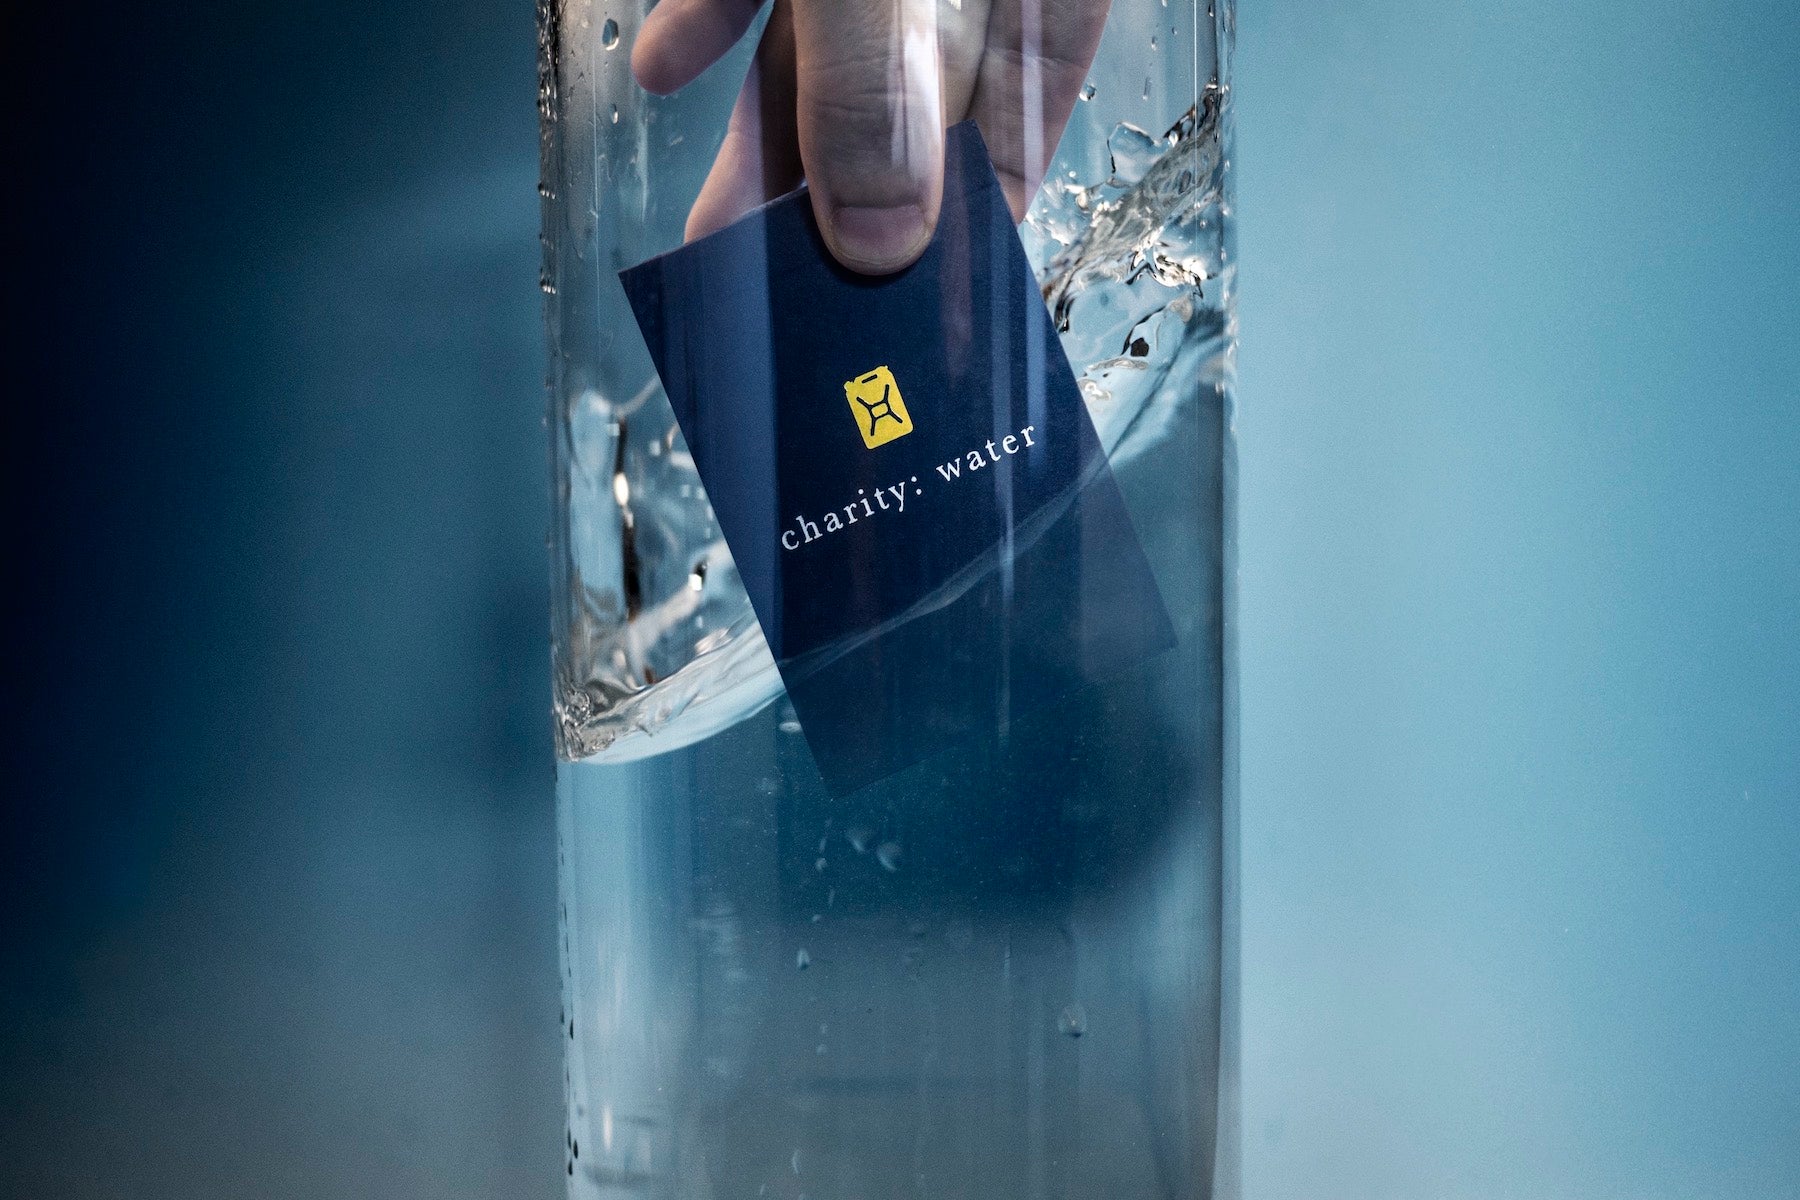 Photograph of a playing card being submerged in water. This card deck was made to raise money for clean water operations in Sudan, Ethiopia, Uganda, and Sierra Leone.